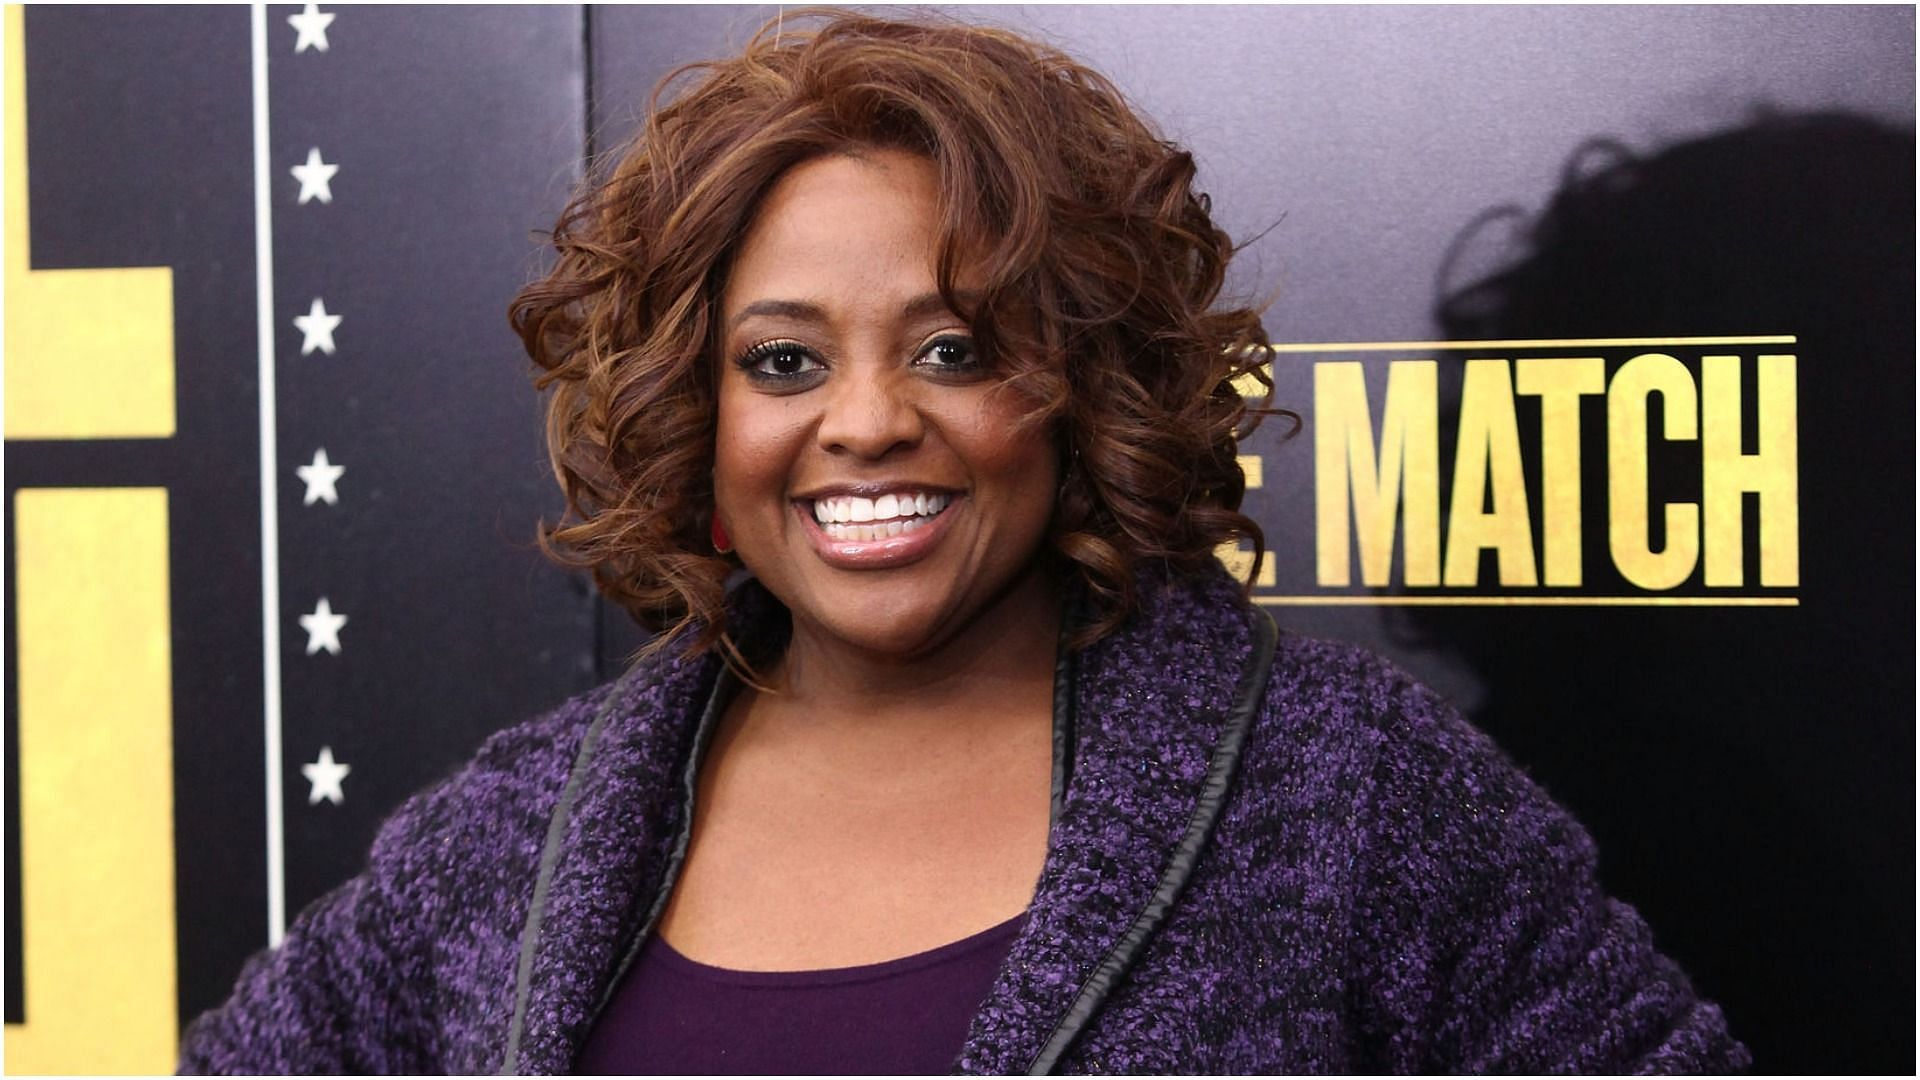 Sherri Shepherd&#039;s hosting has increased the ratings of The Wendy Williams Show (Image by Taylor Hill via Getty Images)